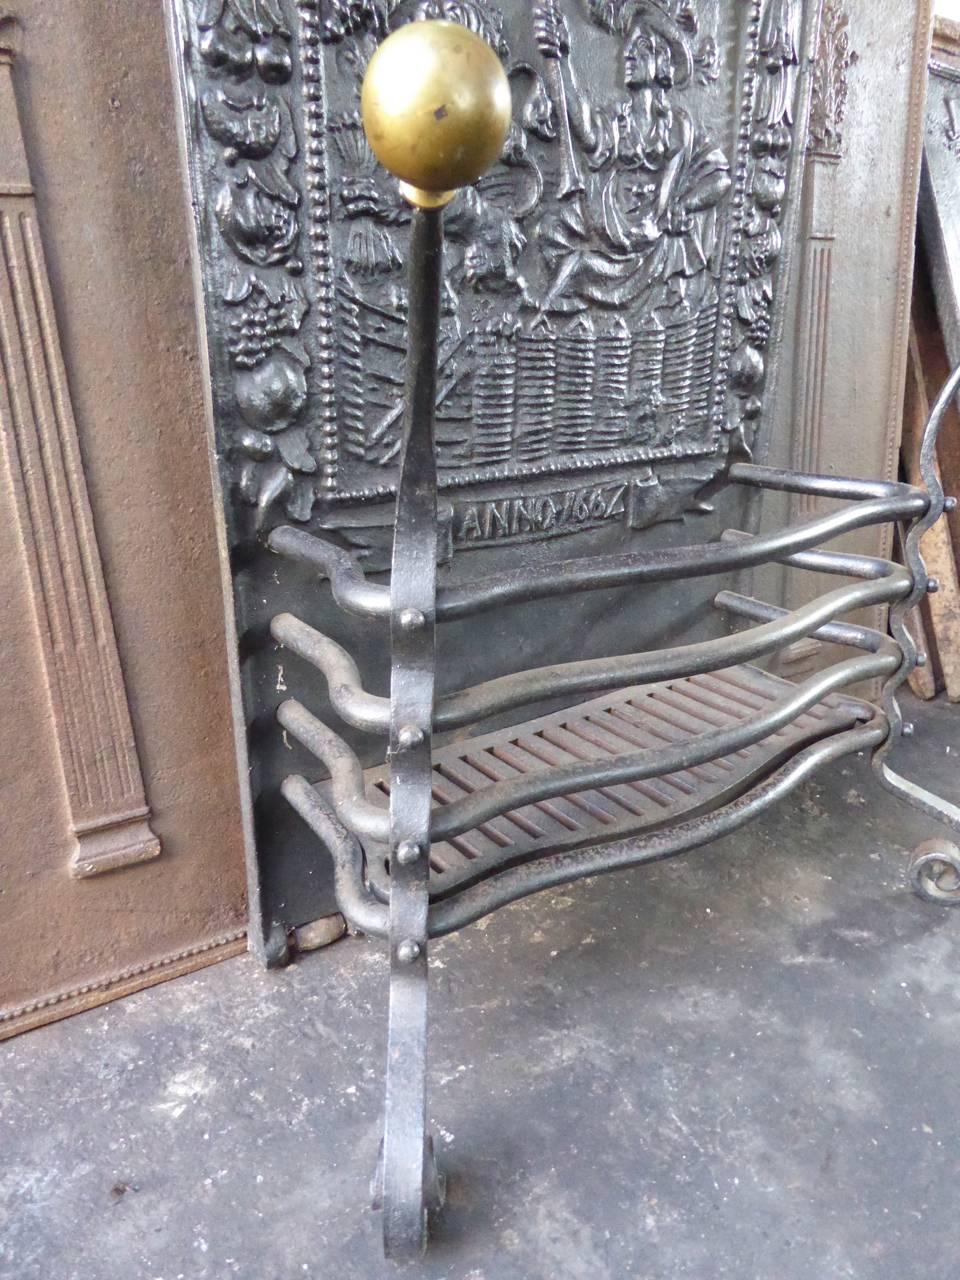 19th century Dutch fireplace grate made of cast iron, wrought iron and brass. 

The back of the grate symbolizes the young Dutch Republic. This picture was from about 1580 onwards the standard motive for the liberation of the Seven United